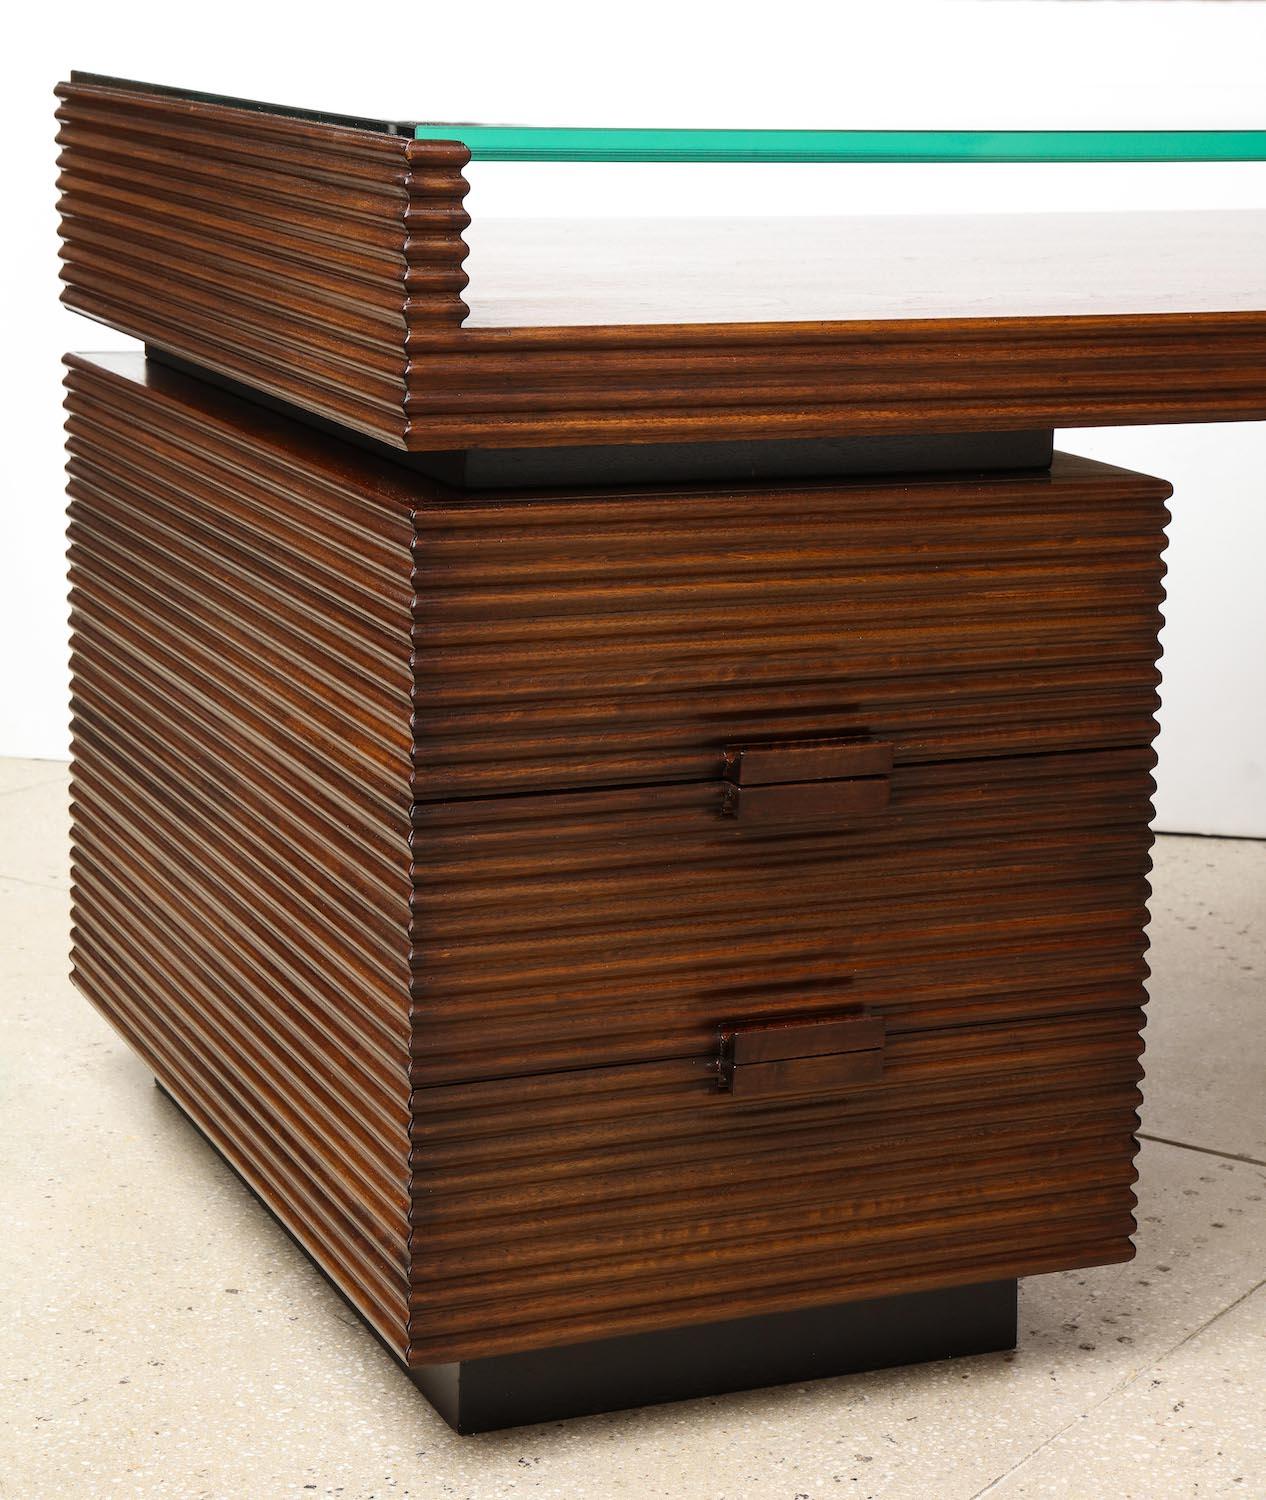 Rare partners desk by Gio Ponti. Rationalist desk from a small group created for the offices at Vetrocoke Glass Company. Incised walnut with 3 drawers on each side. Thick inset glass top. Very good restored condition. Wood has been refinished and